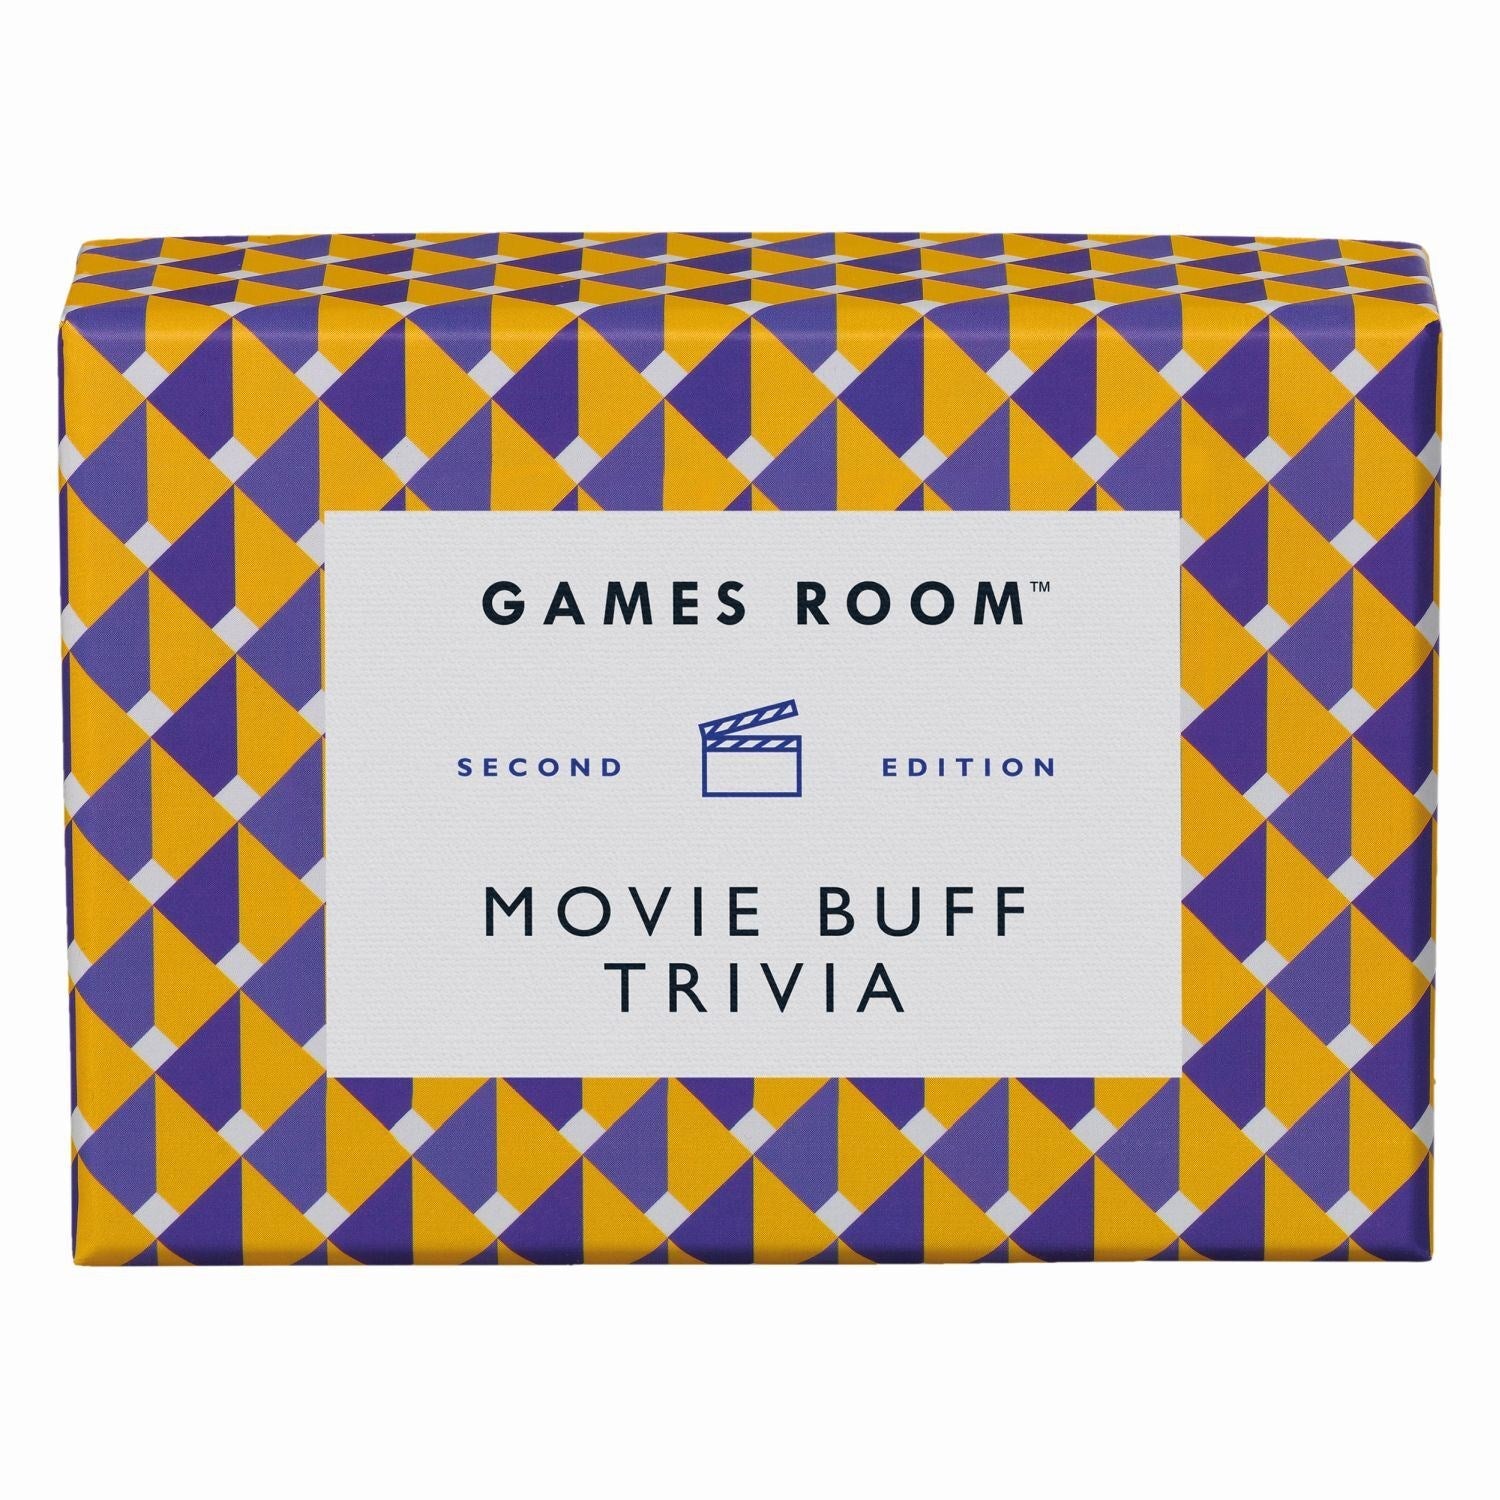 A colorful box of &quot;Movie Buff Trivia&quot; second edition by Chronicle Books.